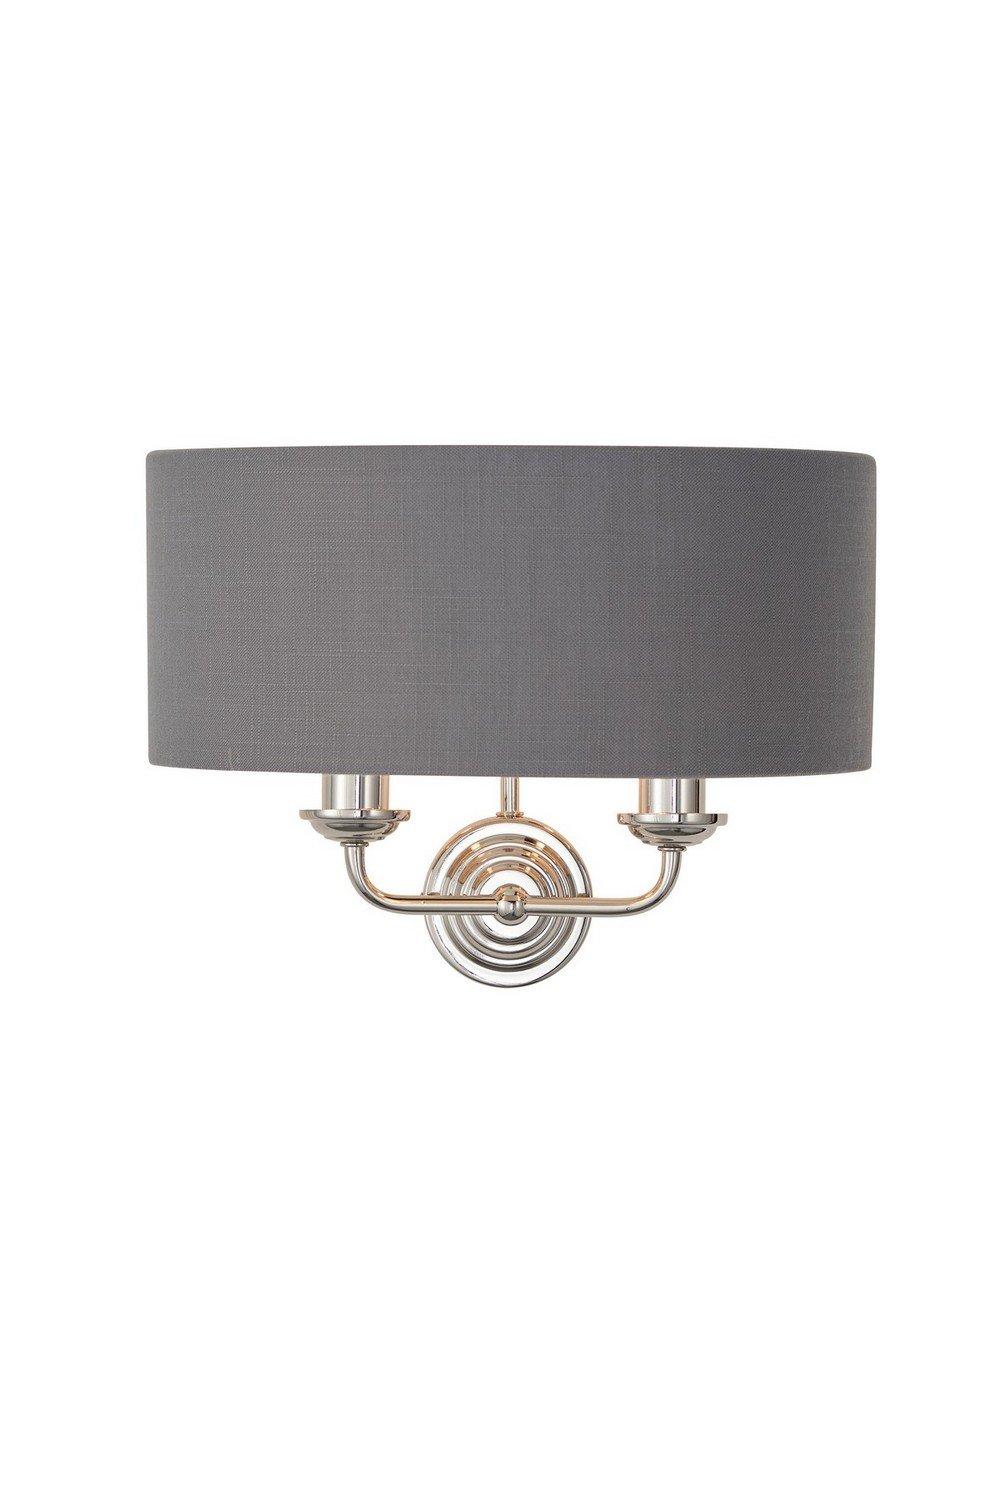 Highclere Shade Wall Lamp Bright Nickel Plate Charcoal Fabric